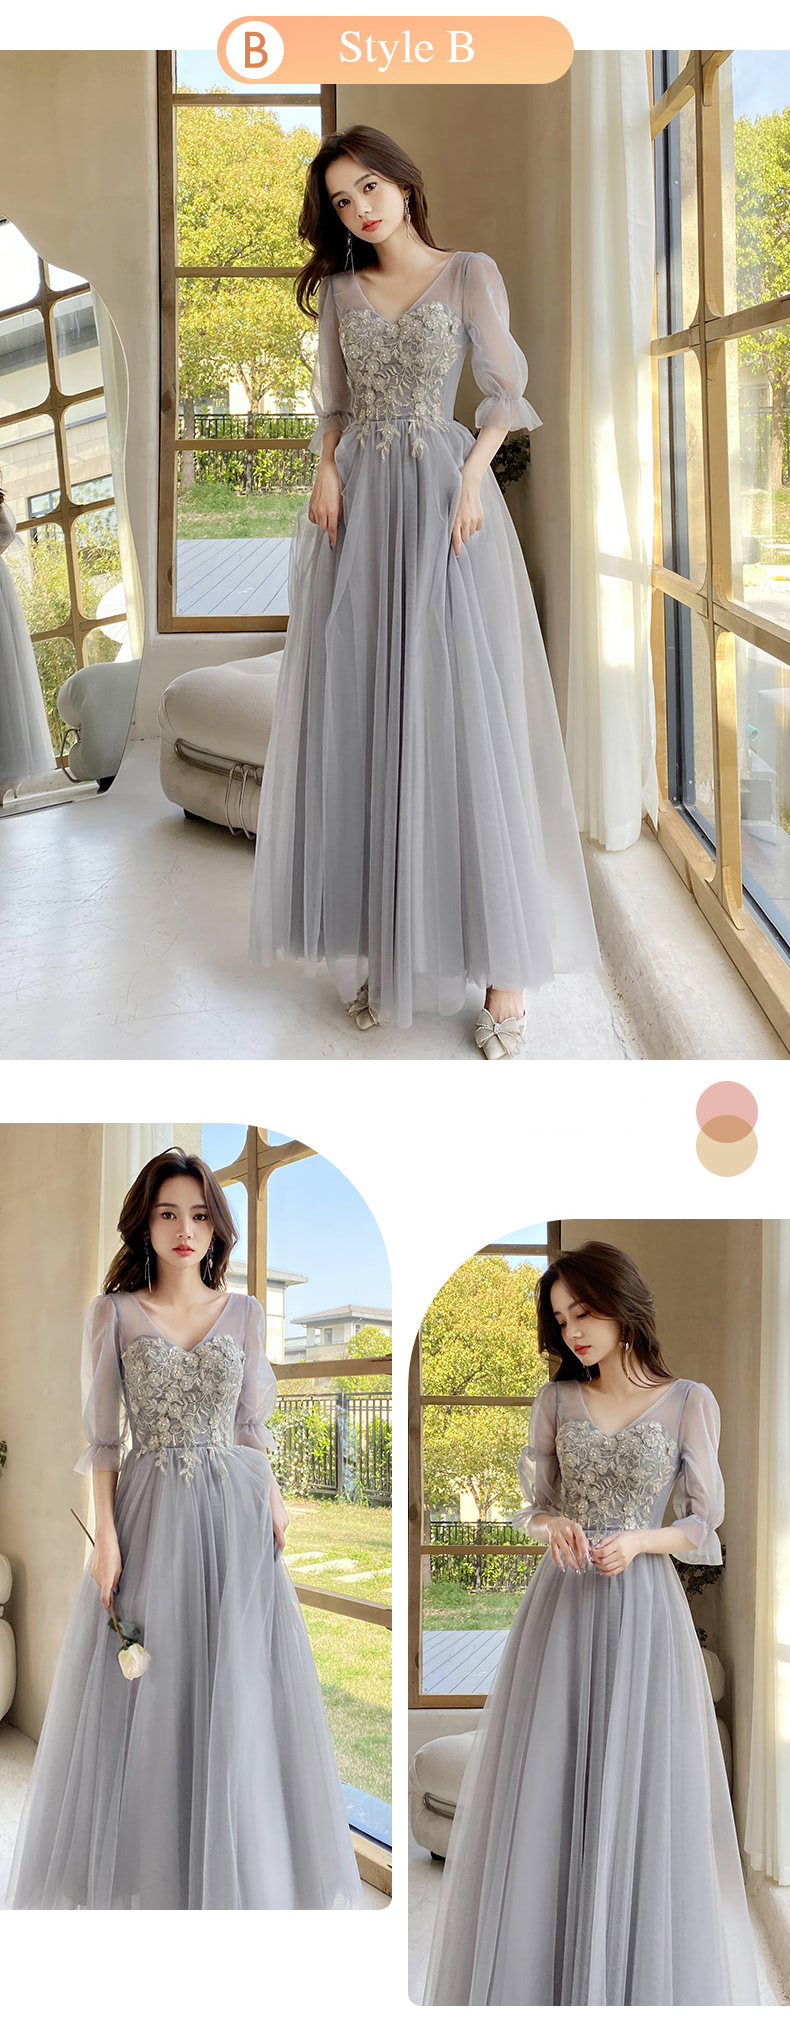 Floral-Embroidery-Gray-Bridesmaid-Party-Formal-Maxi-Long-Dress16.jpg